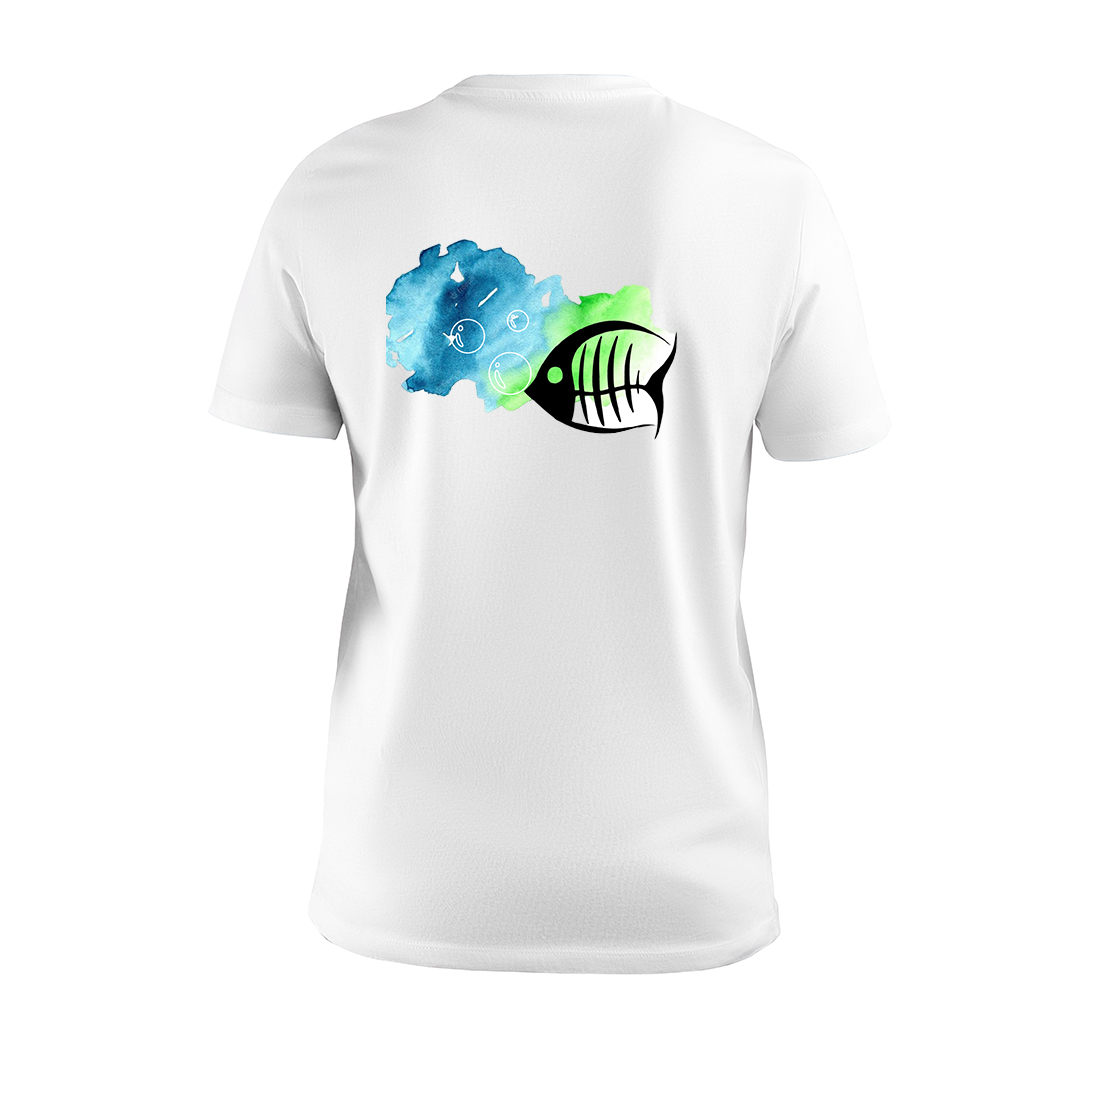 T-shirt design for printing - Fish with bubbles in the sea cover image.